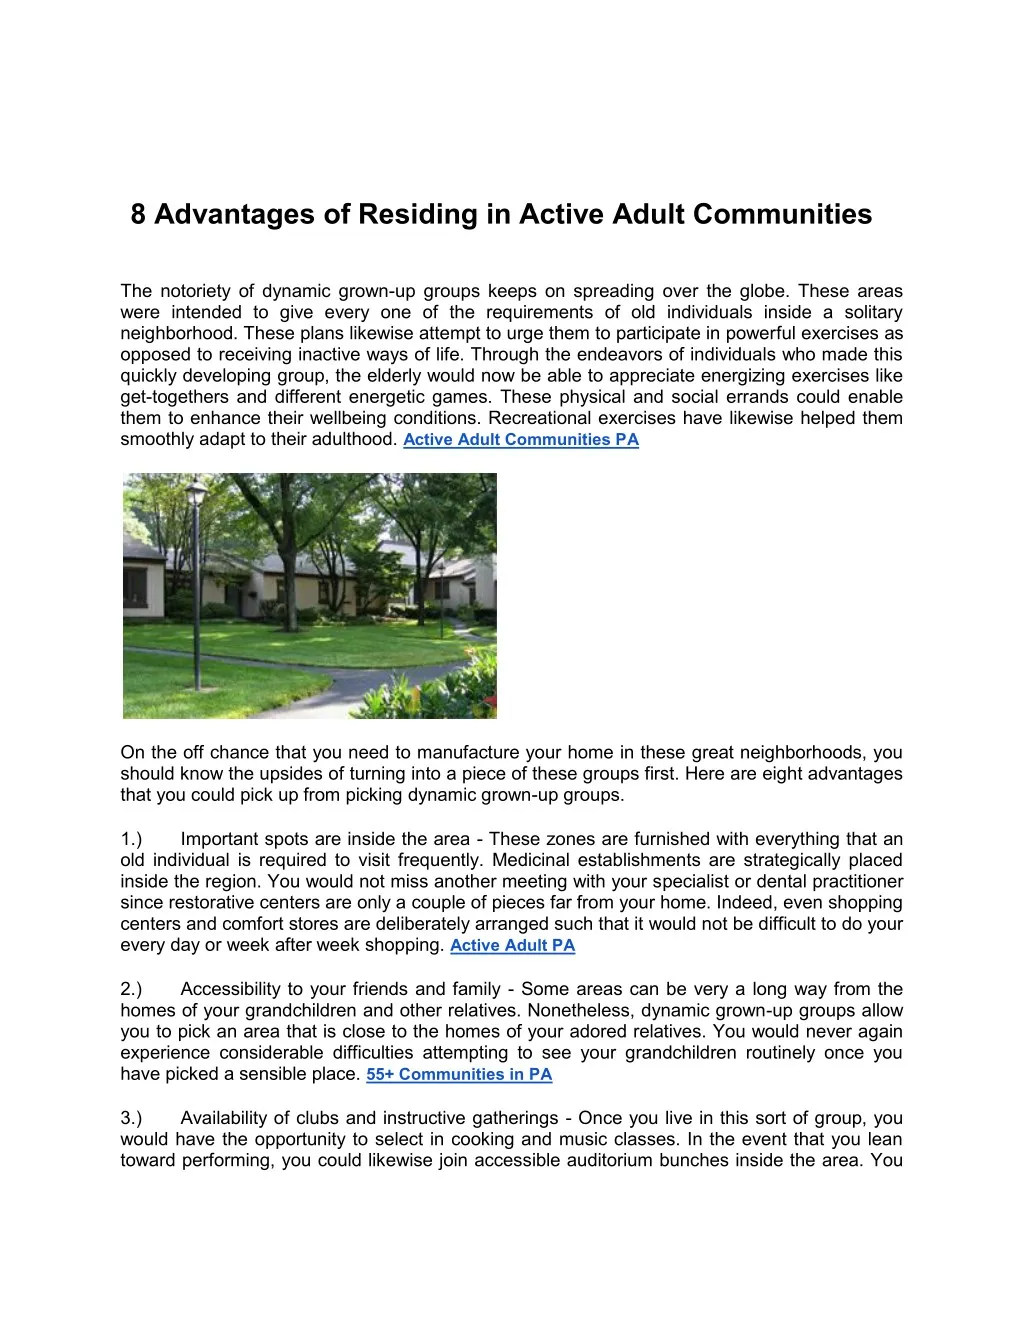 8 advantages of residing in active adult